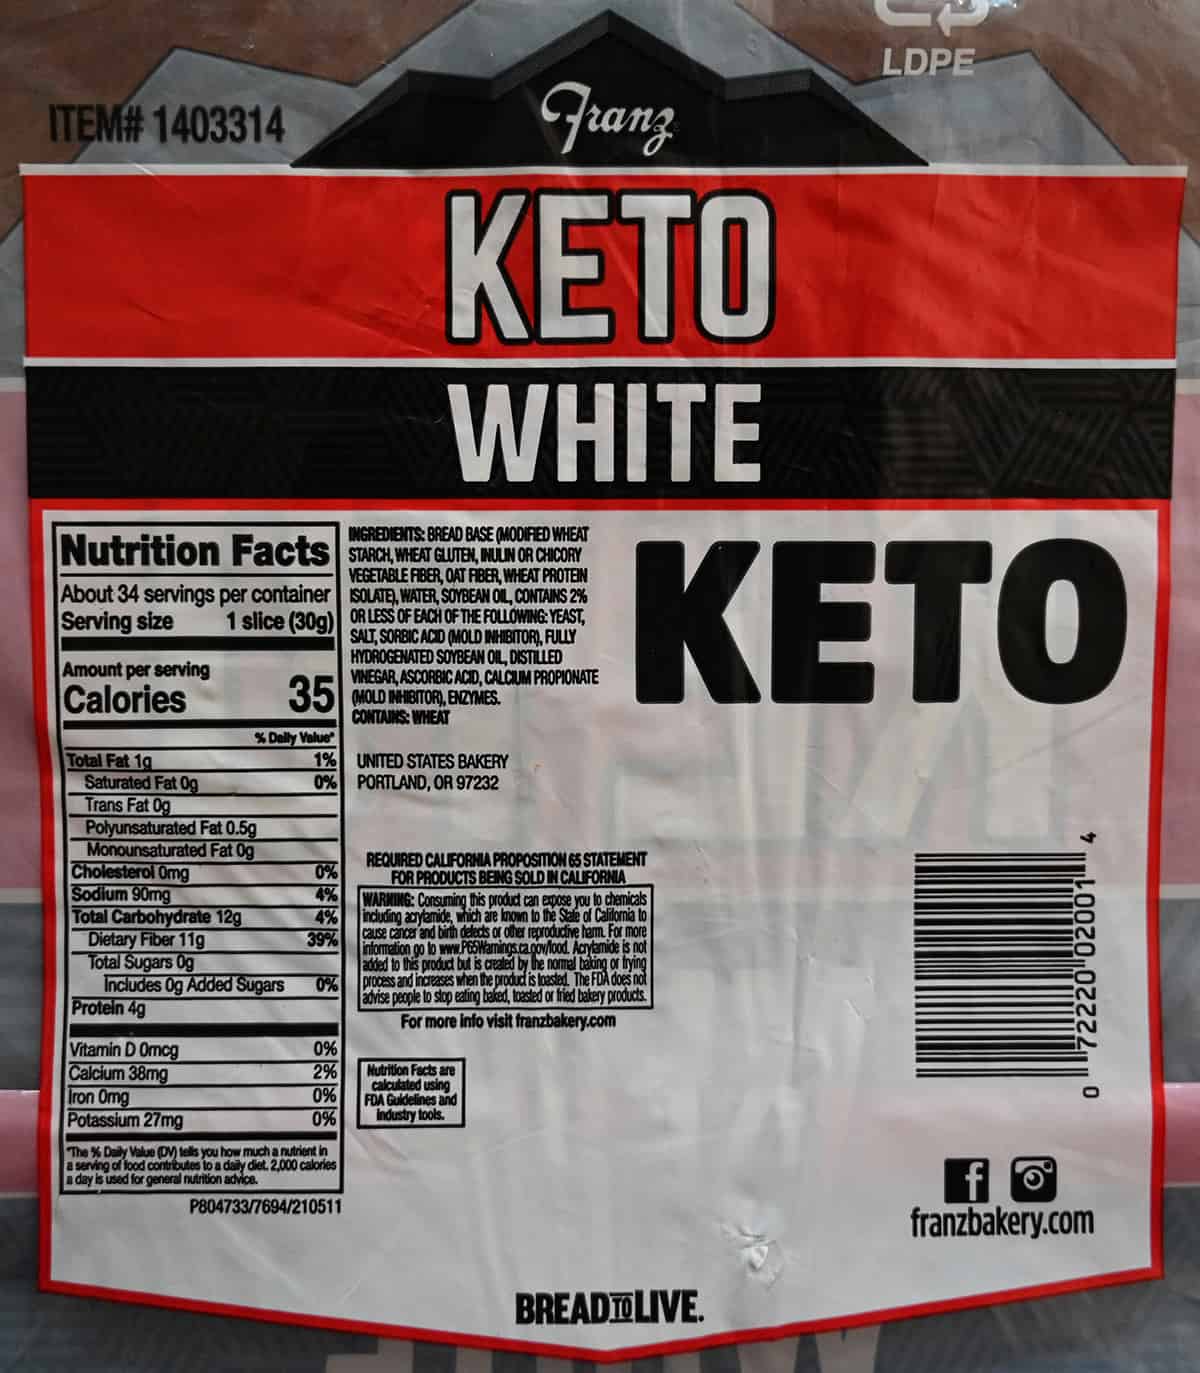 Image of the back of the bag of keto bread showing where it's made, nutrition facts and ingredients.